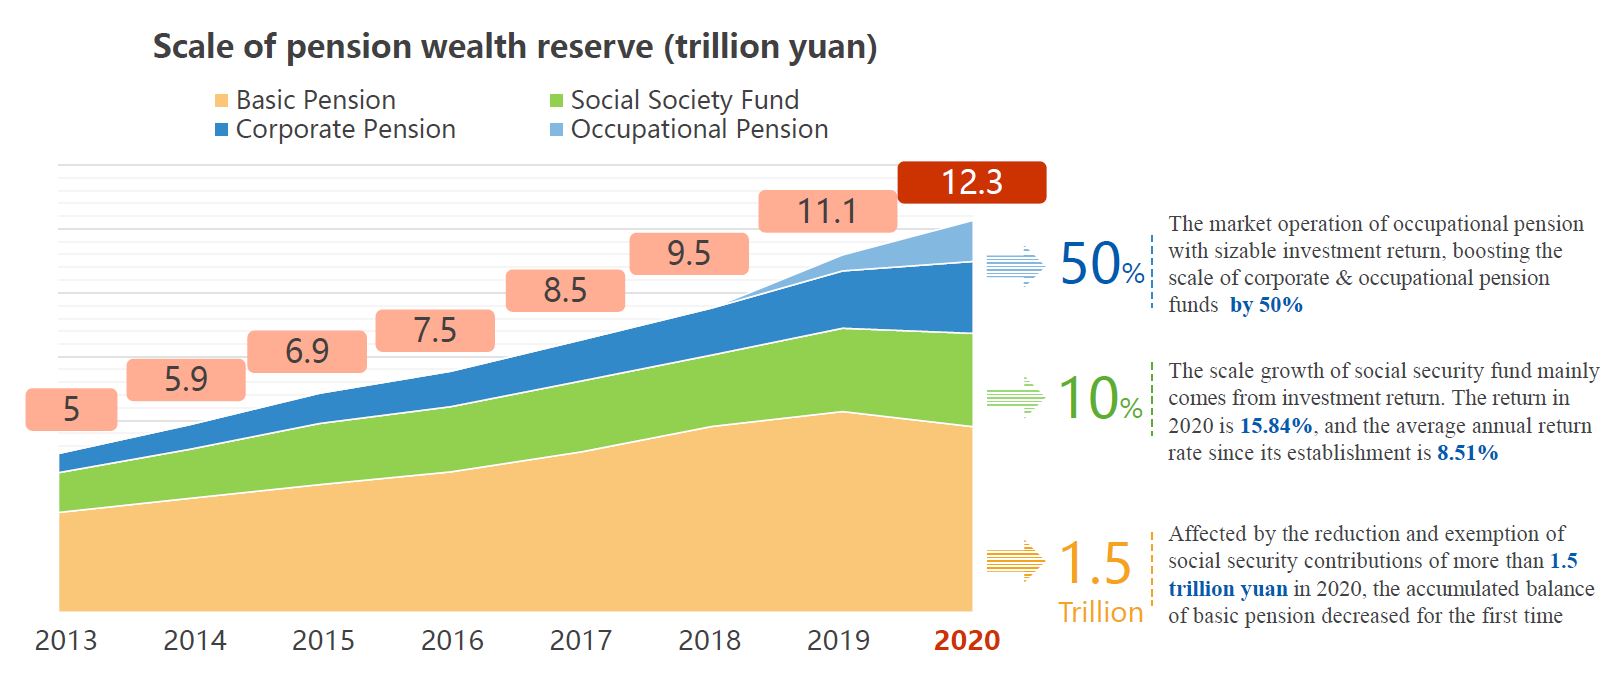 Scale of pension wealth reserve